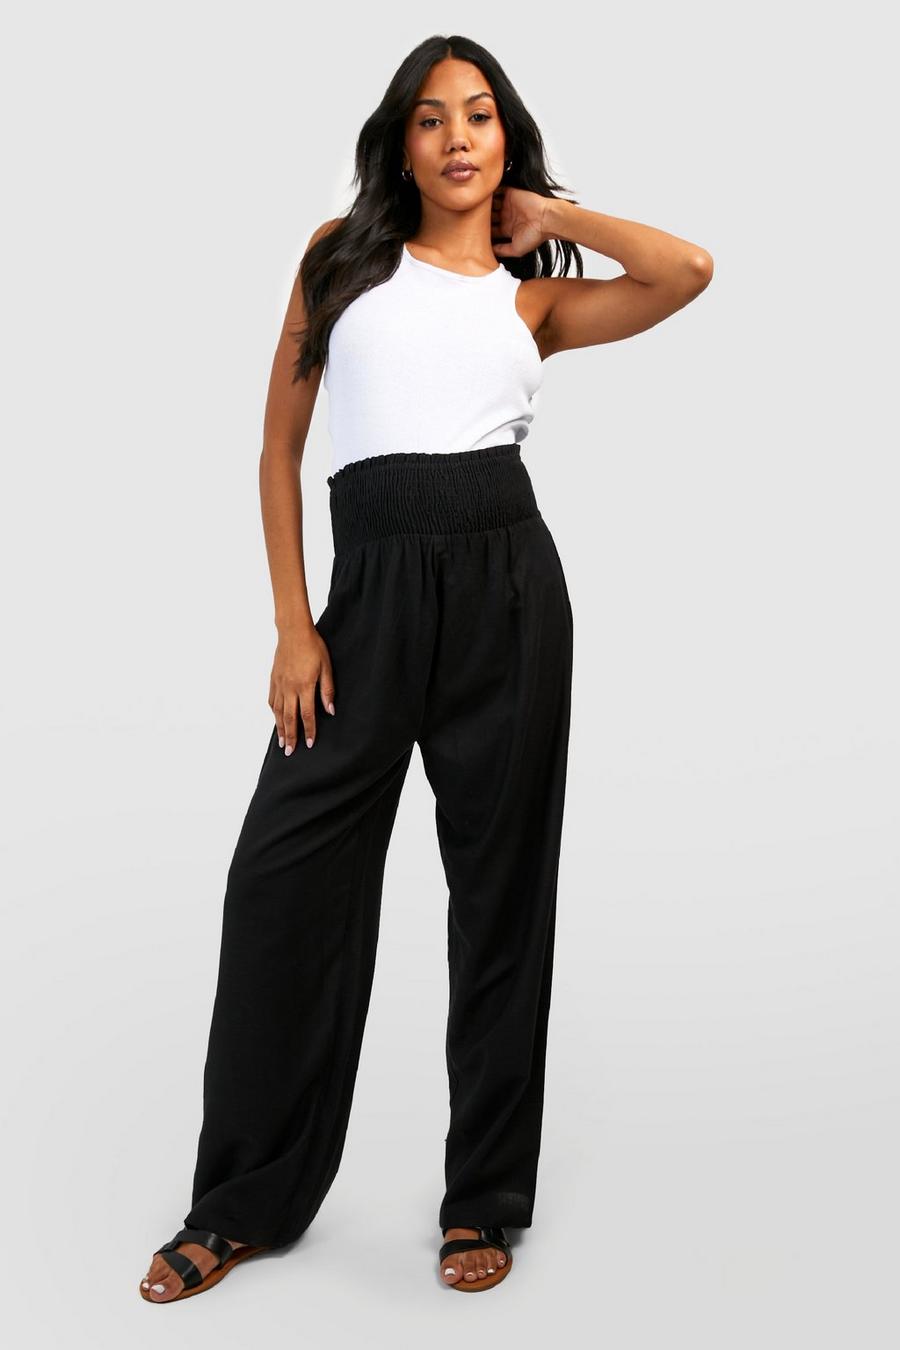 Maternity Pants for Work  High Waisted Pants – Bhome Maternity